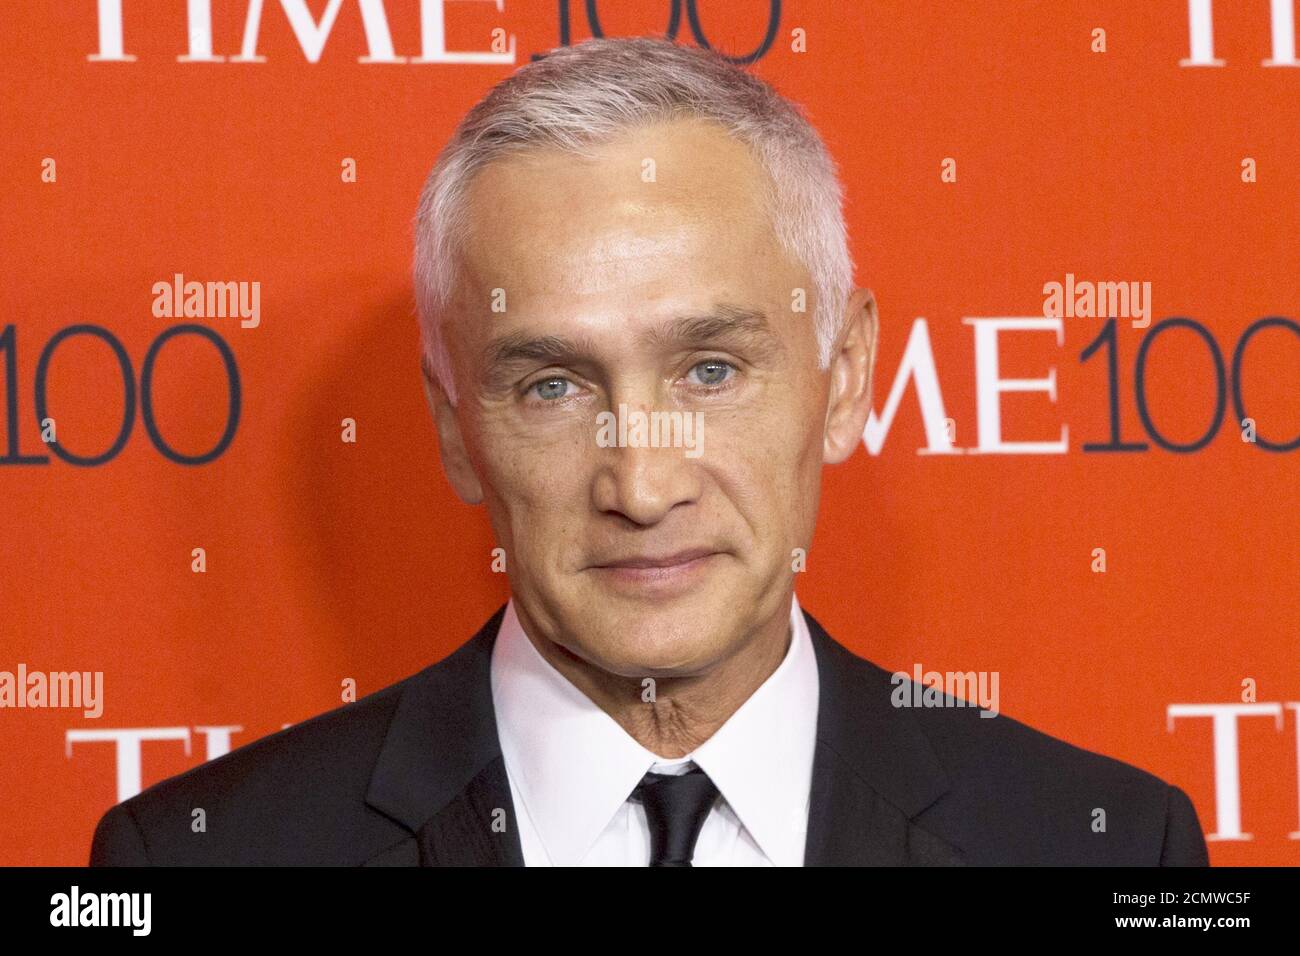 Jorge ramos hi-res stock photography and images - Alamy